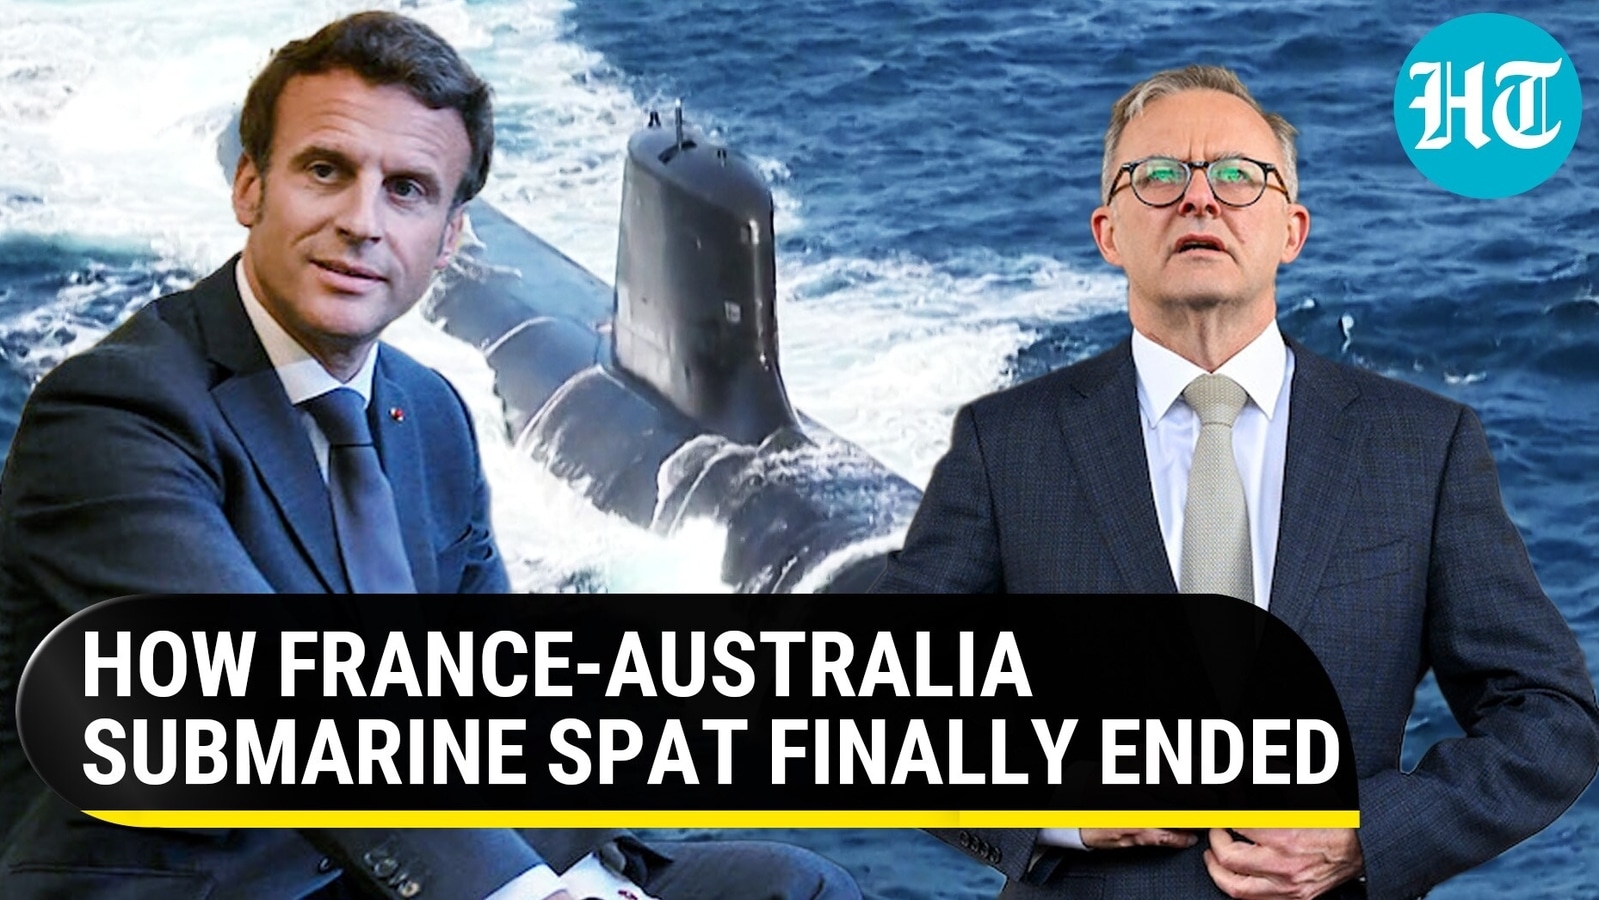 Australia to Compensate France after Ditching Multi-Billion-Dollar Submarine Deal for AUKUS